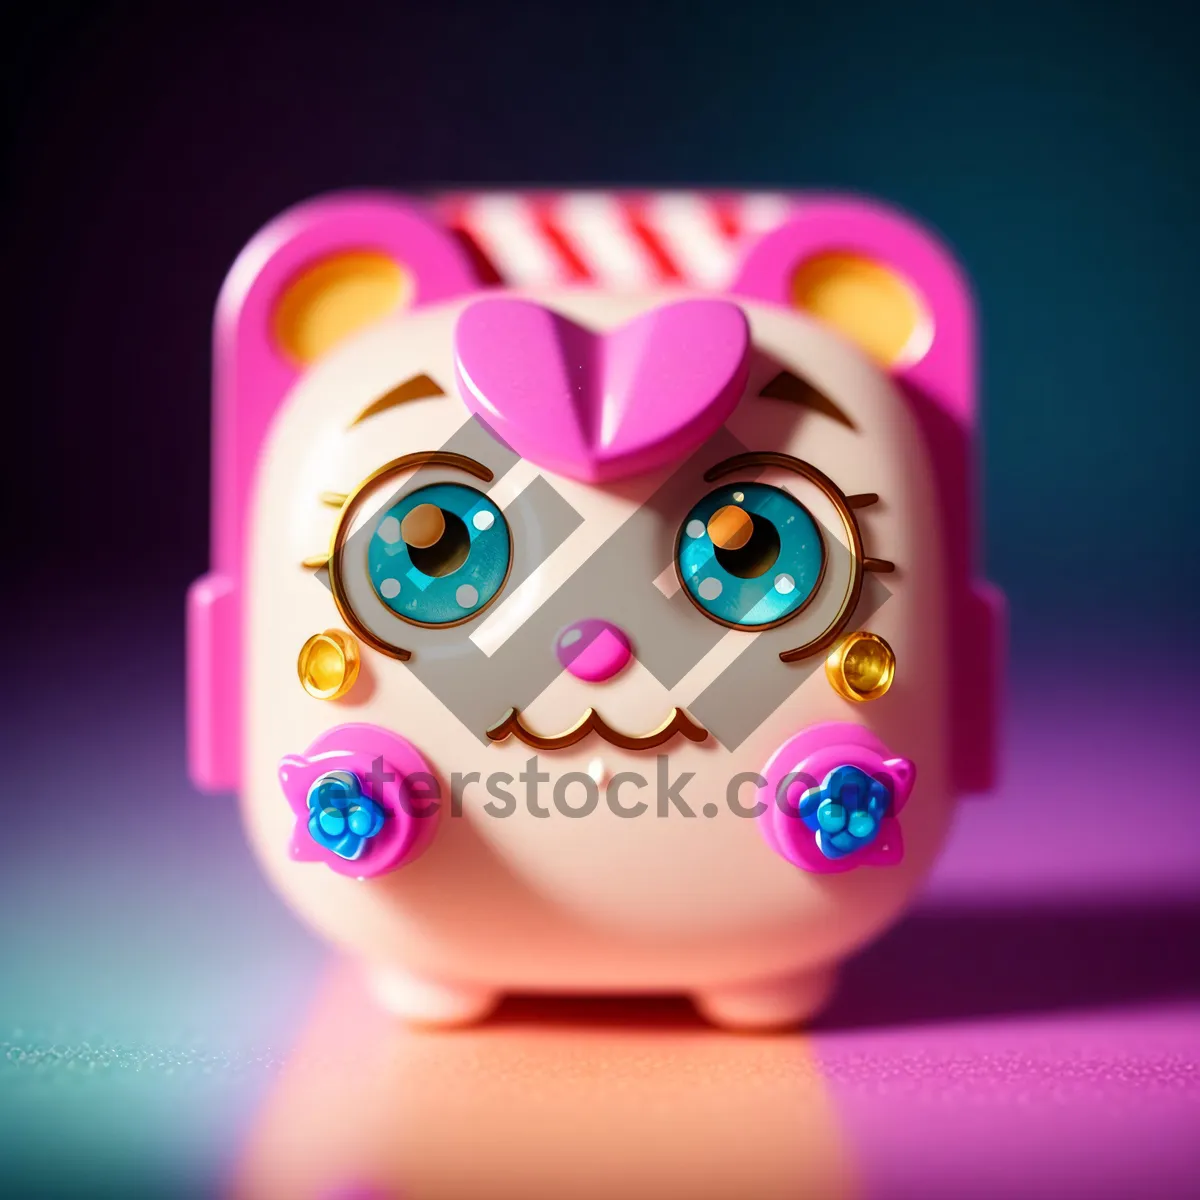 Picture of Money-filled Piggy Bank Toy - Savings and Investment Container